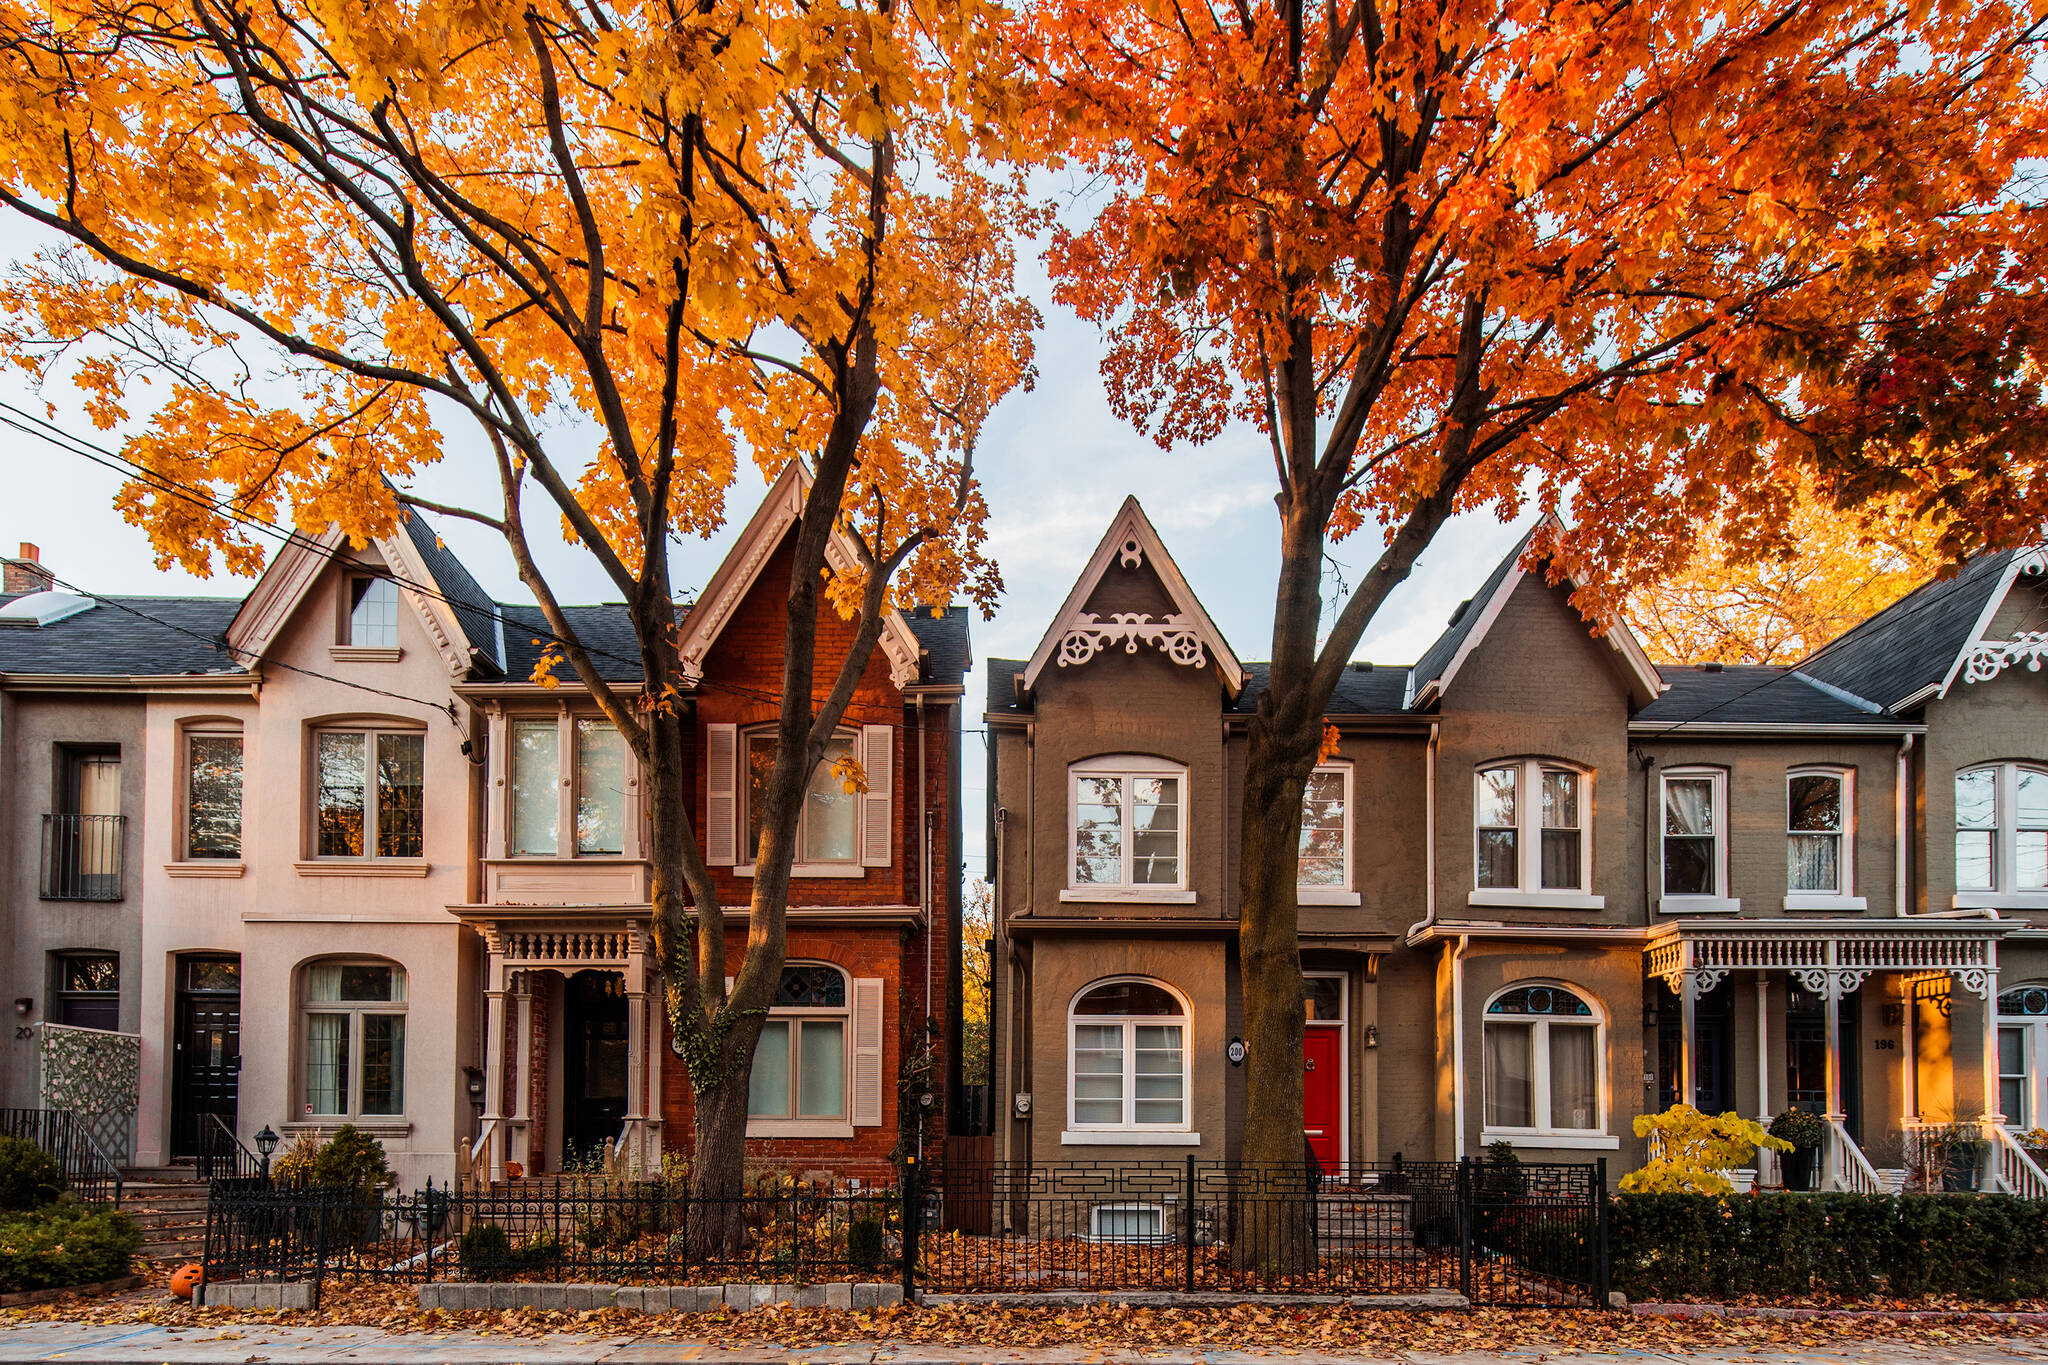 Toronto home prices expected to skyrocket in 2020